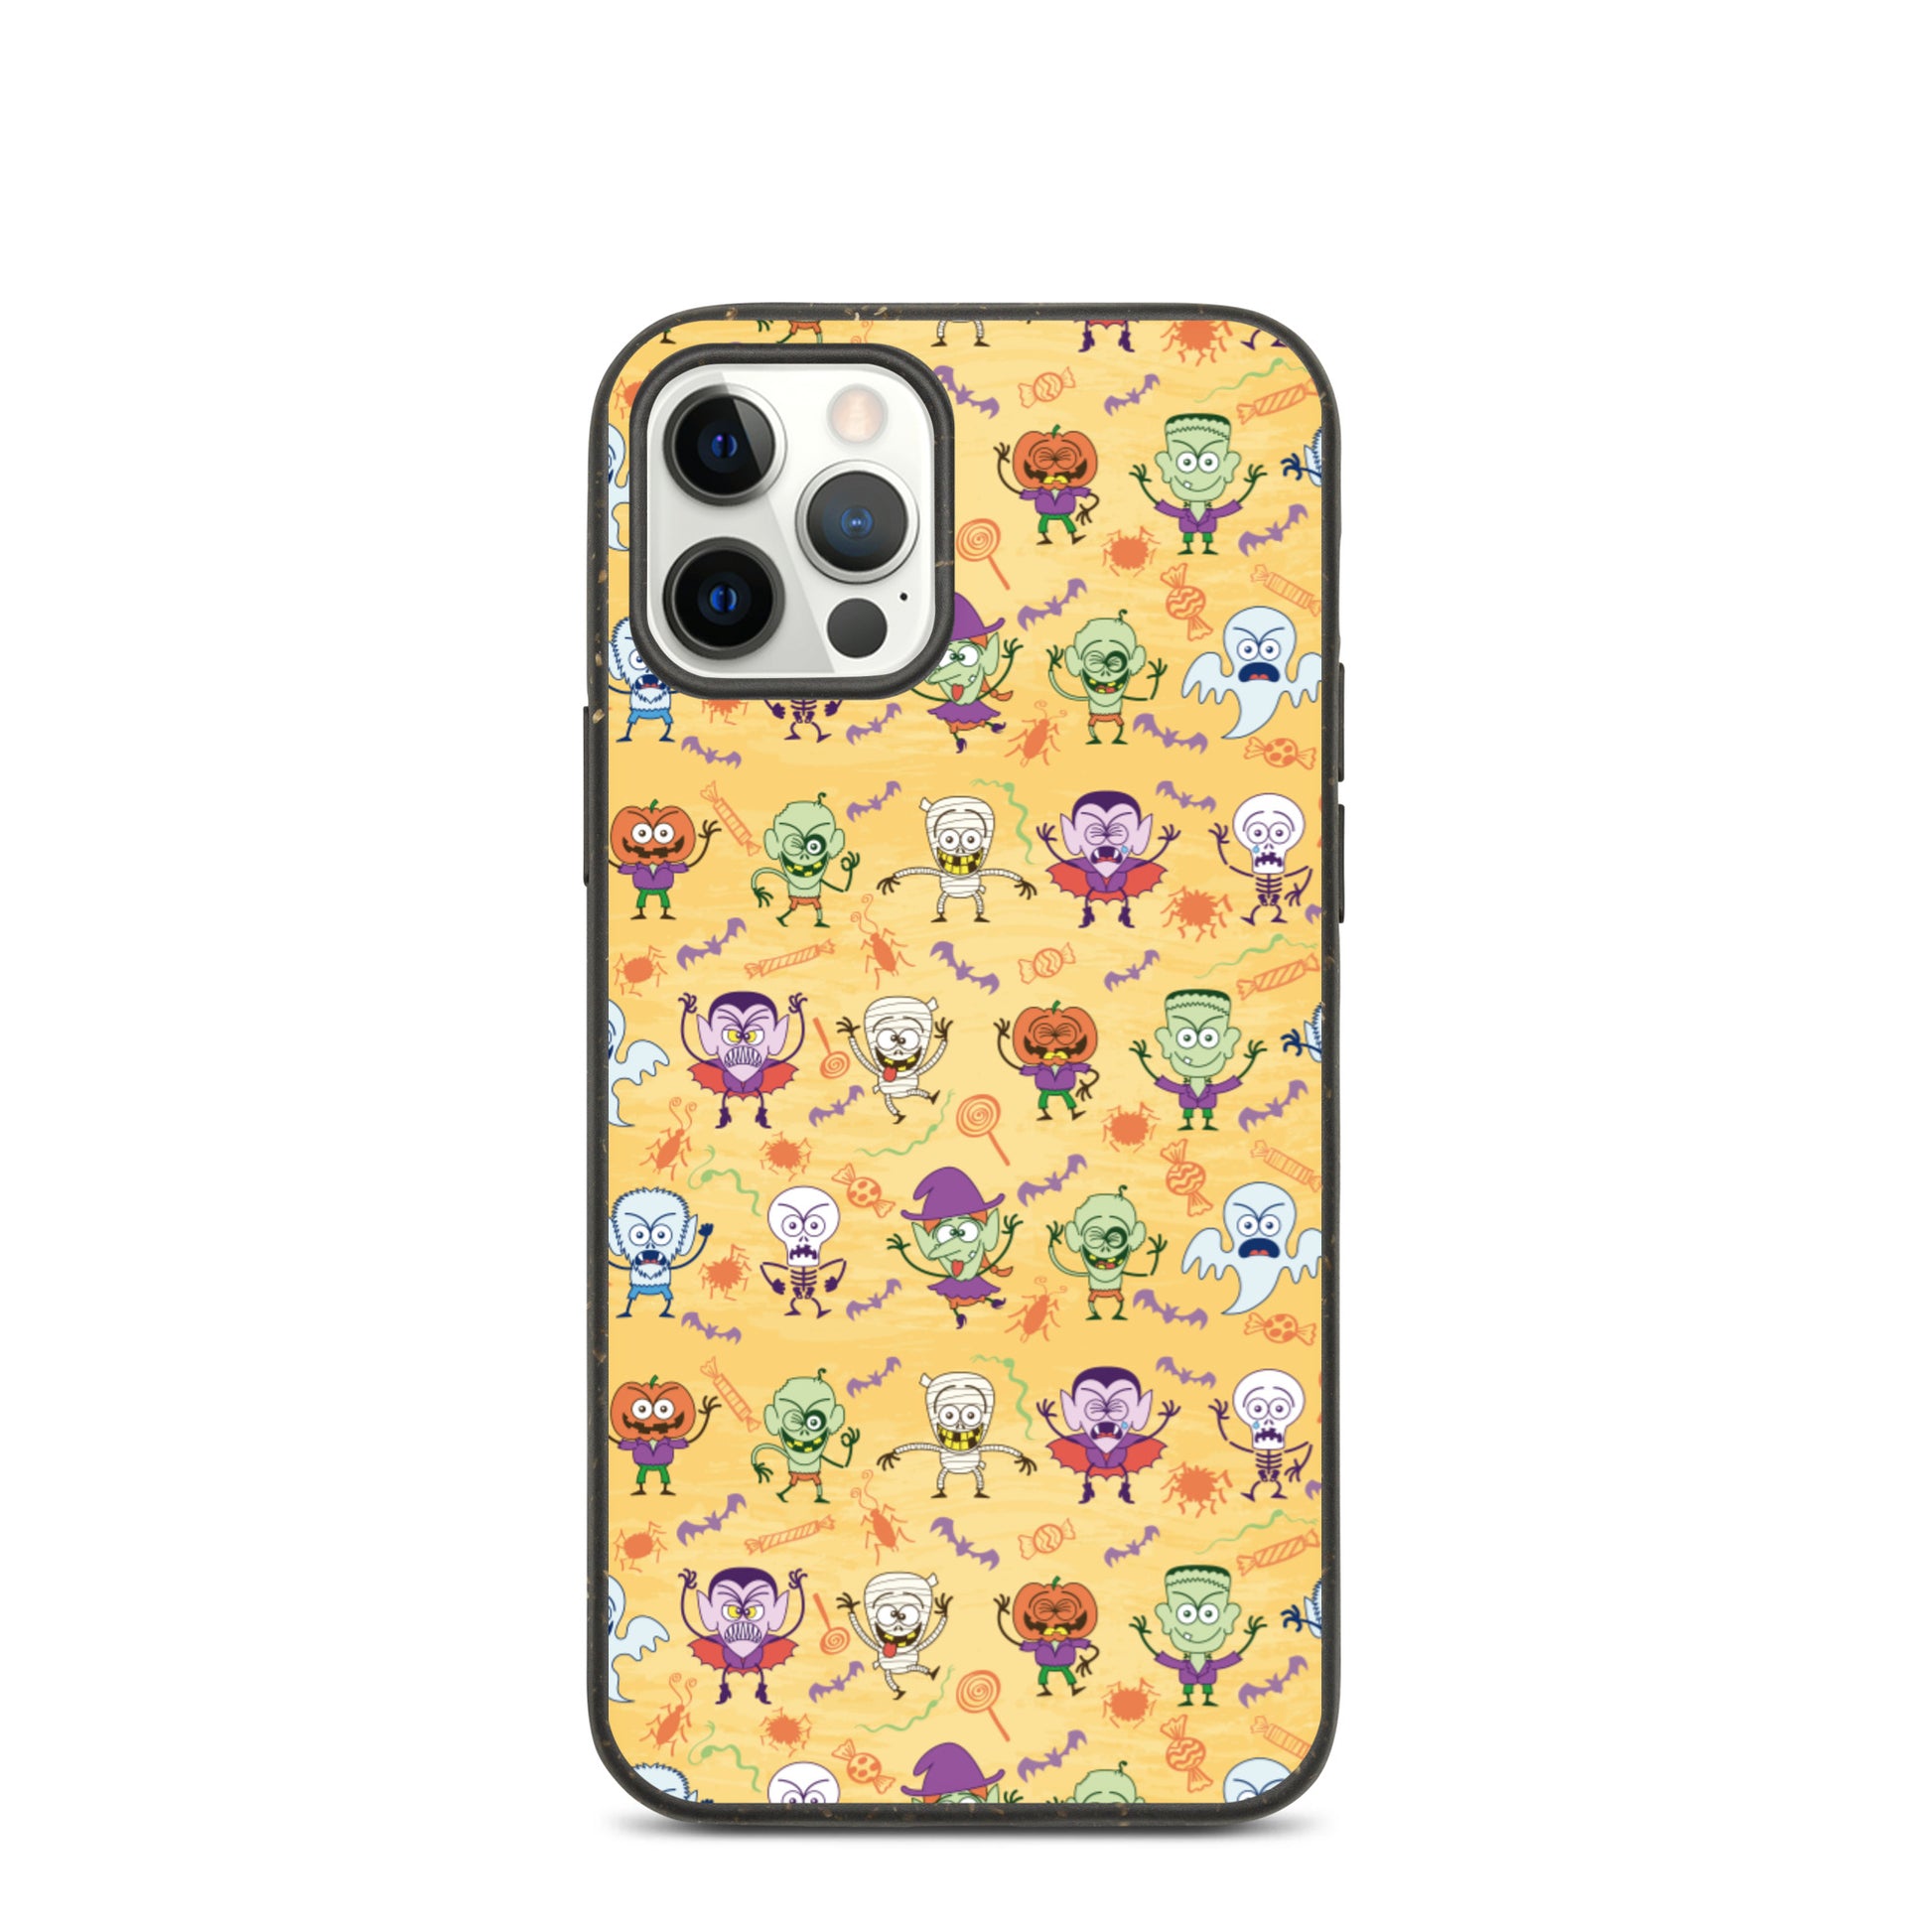 Halloween characters making funny faces Speckled iPhone case. IPhone 12 pro